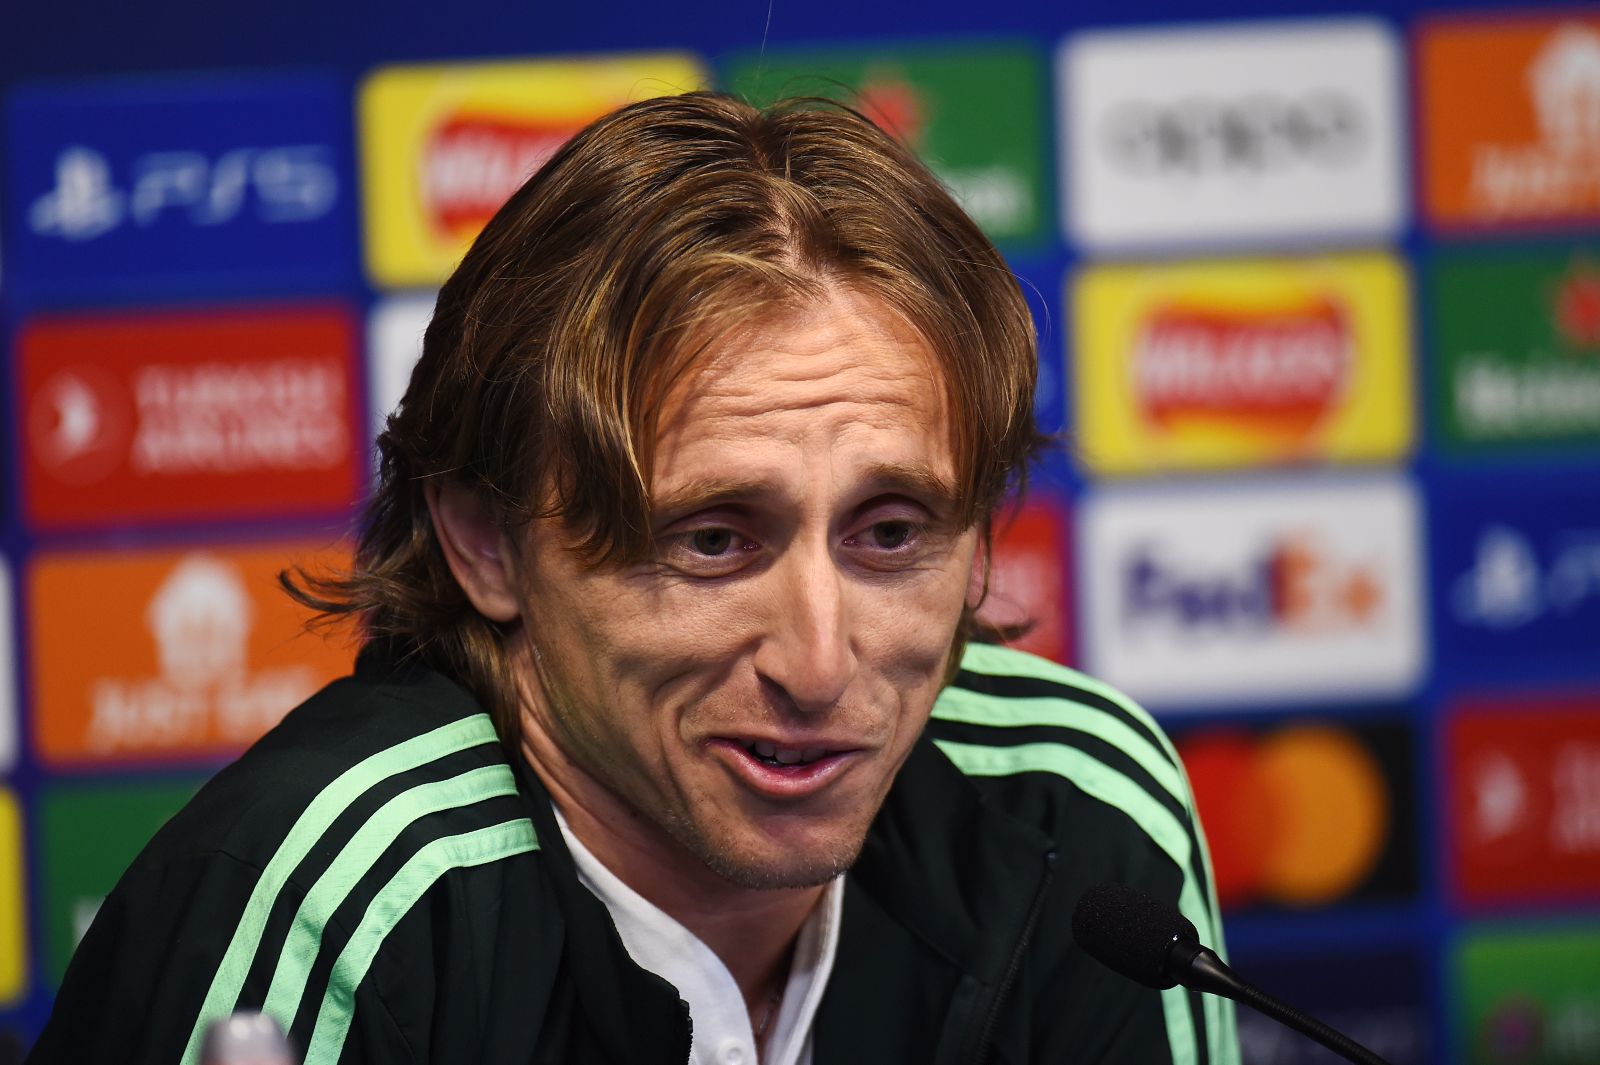 epa10631867 Real Mardid's Luka Modric attends a press conference held at the Etihad Stadium, Manchester, Britain, 16 May 2023. Real Madrid face Manchester City in a UEFA Champions League semi-finals, 2nd leg soccer match on 17 May.  EPA/PETER POWELL